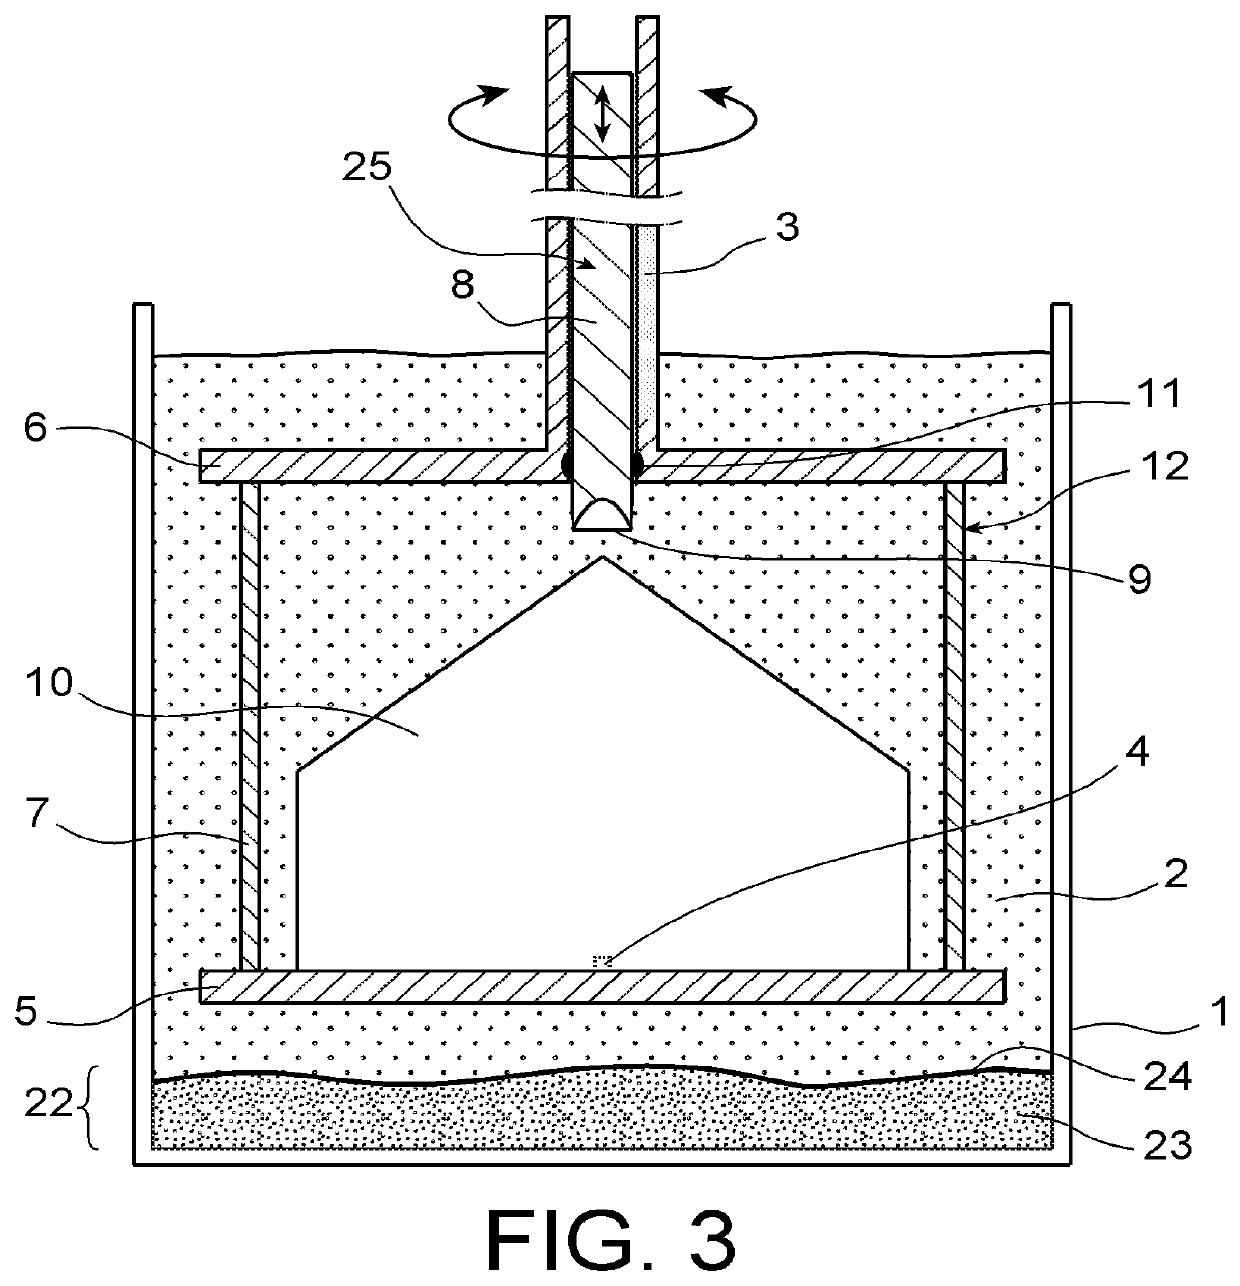 Method for manufacturing a single crystal by solution growth enabling trapping of parasitic crystals